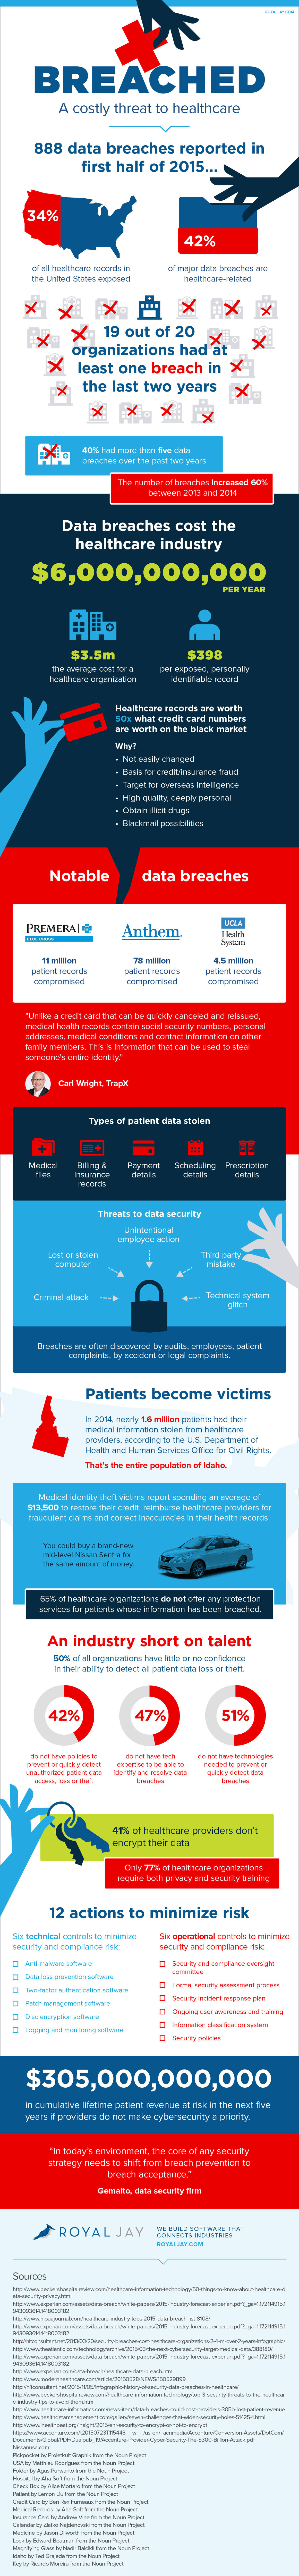 Breached: A costly threat to healthcare infographic